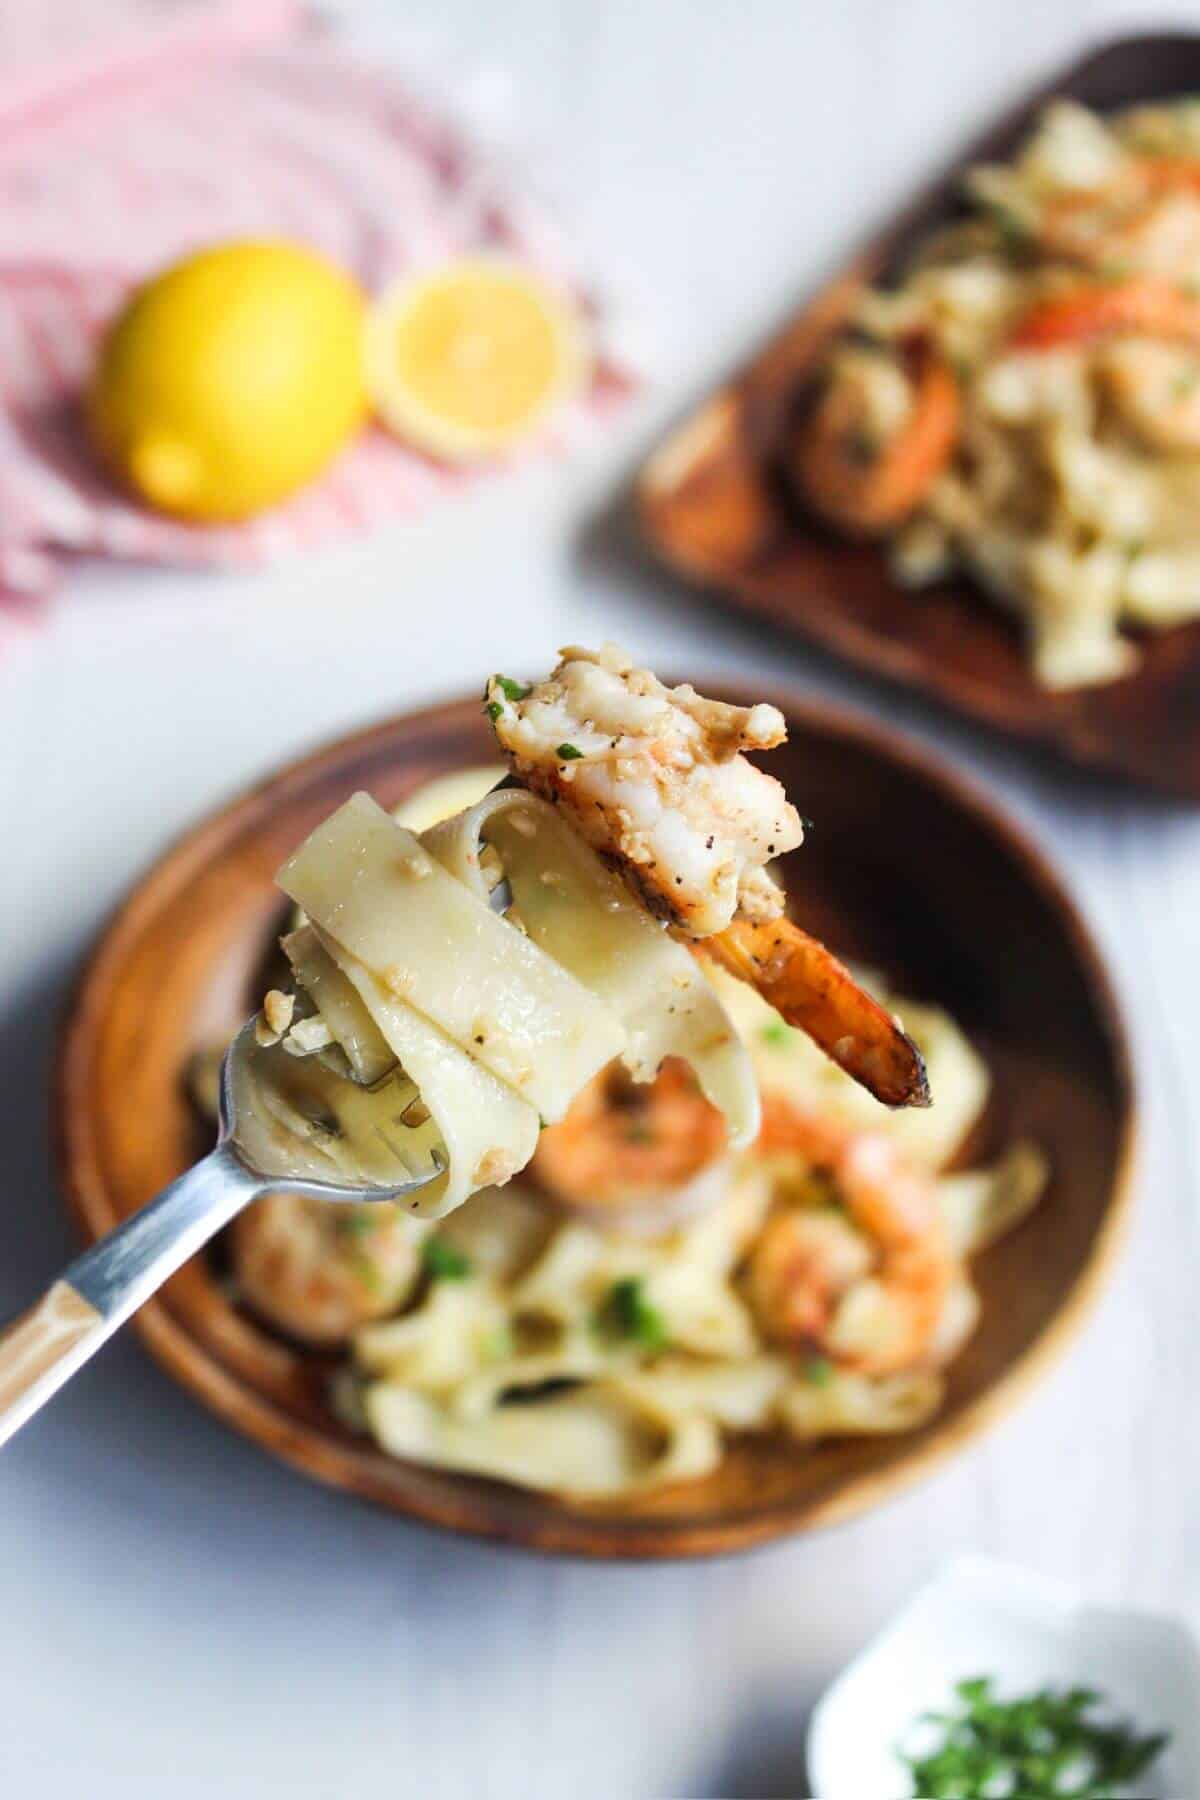 A spoon full of pasta with shrimp and lemon.